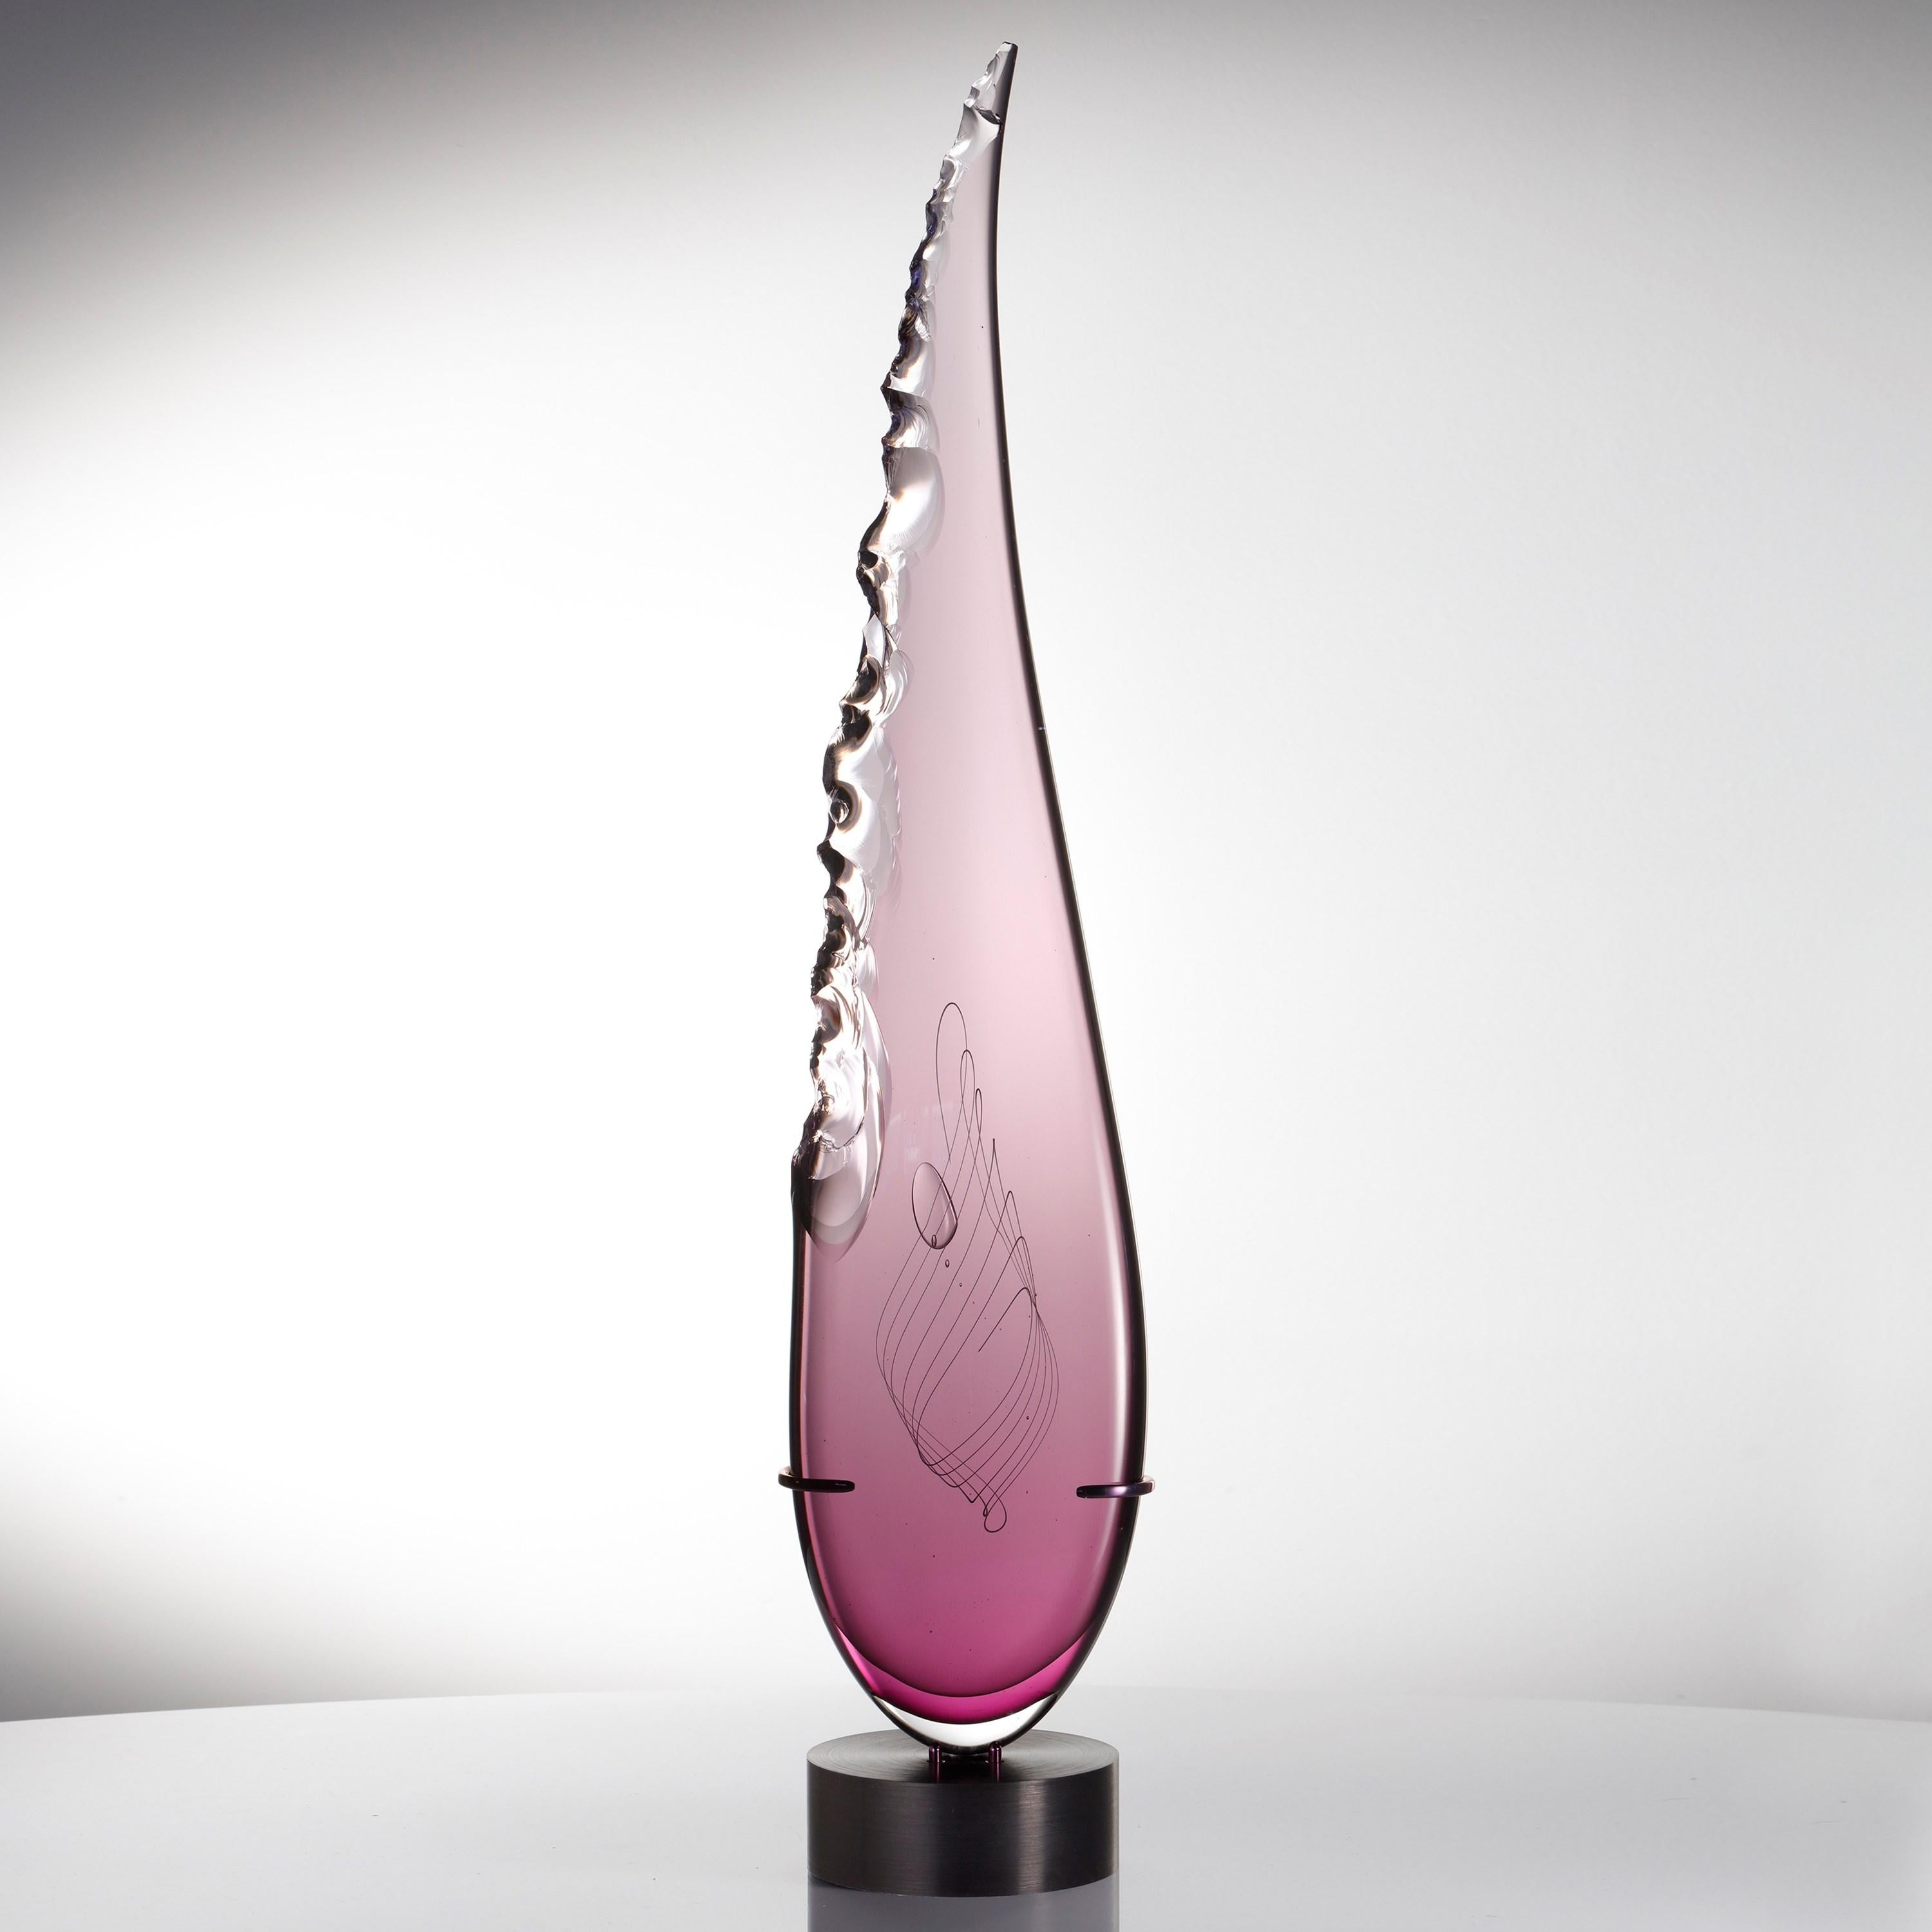 'Clovis in Amethyst' is a unique tall glass sculpture by the British artist James Devereux.

Refinement and daring combine within this statuesque sculpture. Poised upon a museum-quality patinated steel base, the eye is drawn upwards to the final